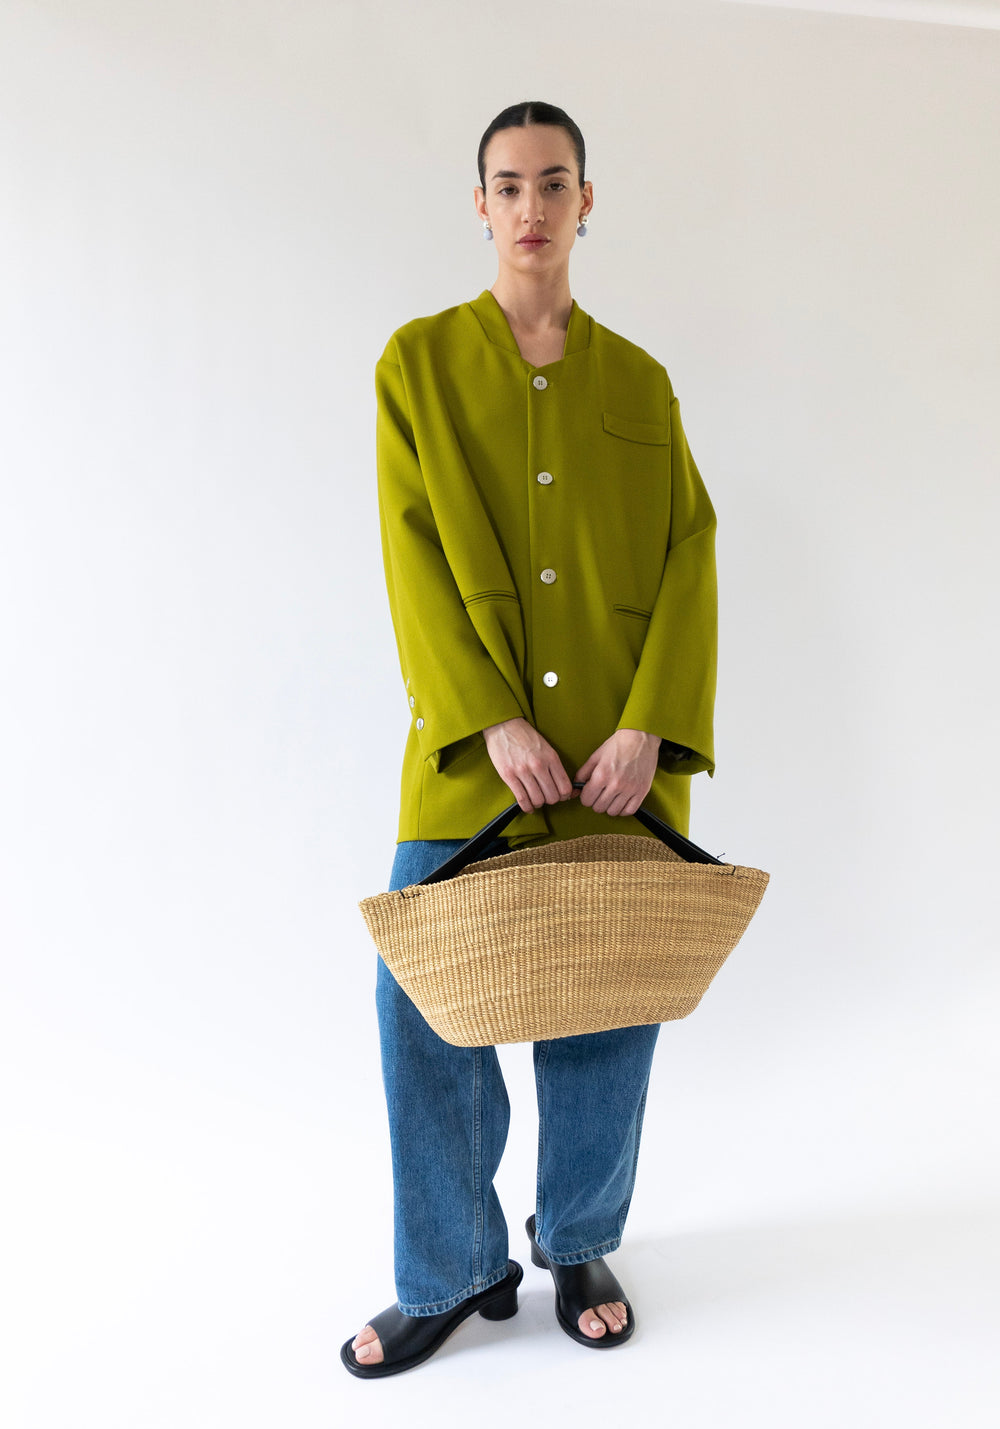 Gousse Straw Bag No.34 in Natural